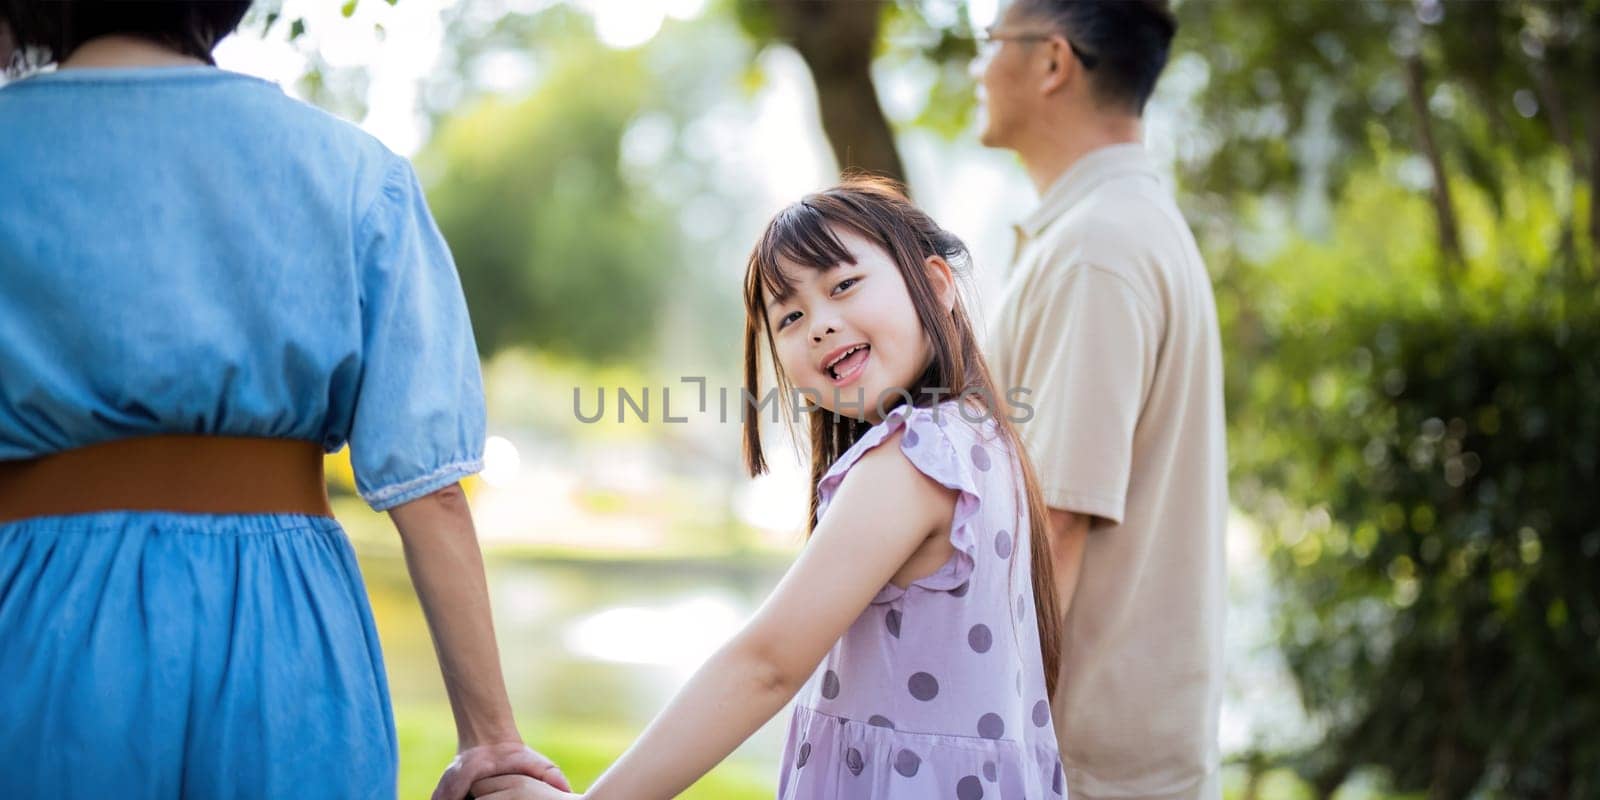 Grandparent playing togetherness with a granddaughter in the park in the morning. Family, love and grandchild bonding with grandfather and grandma in a park. concept child and senior.